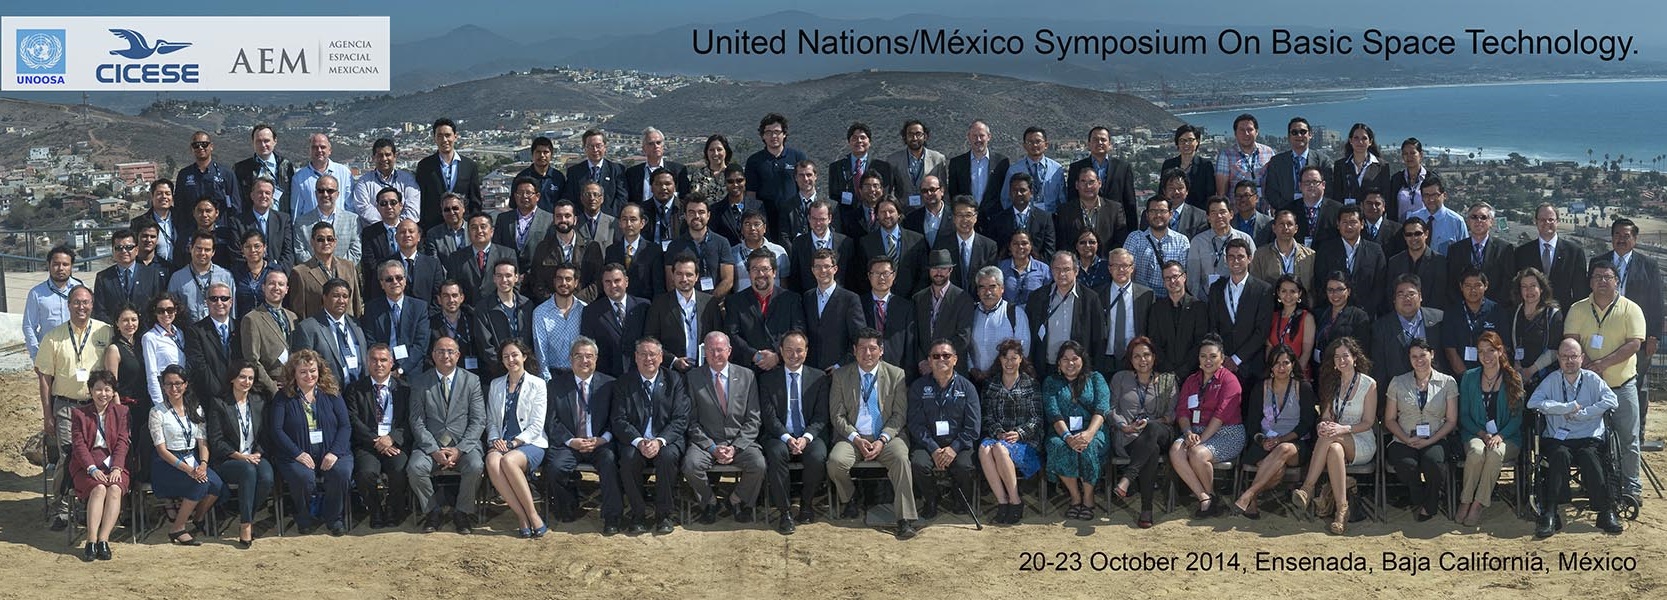 UN/Mexico Symposium Group Picture thumb